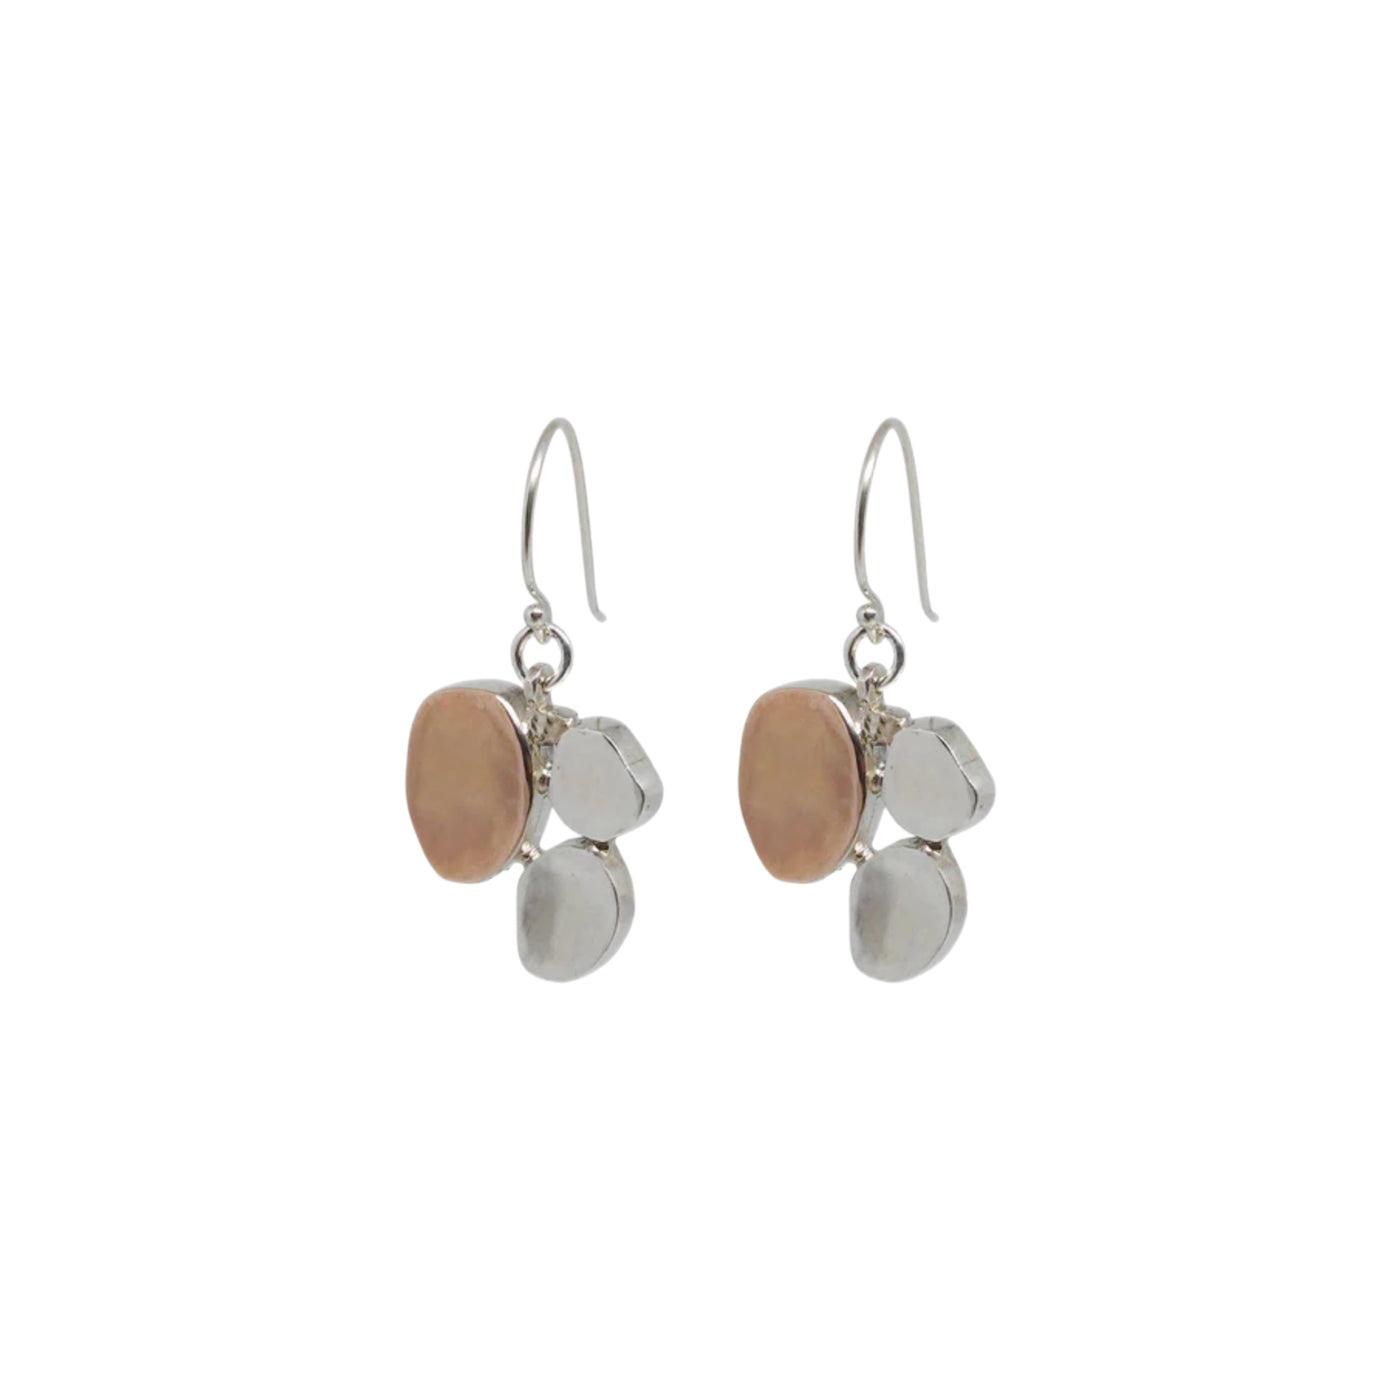 Sterling silver and 9ct rose gold handcrafted Israeli drop earrings 